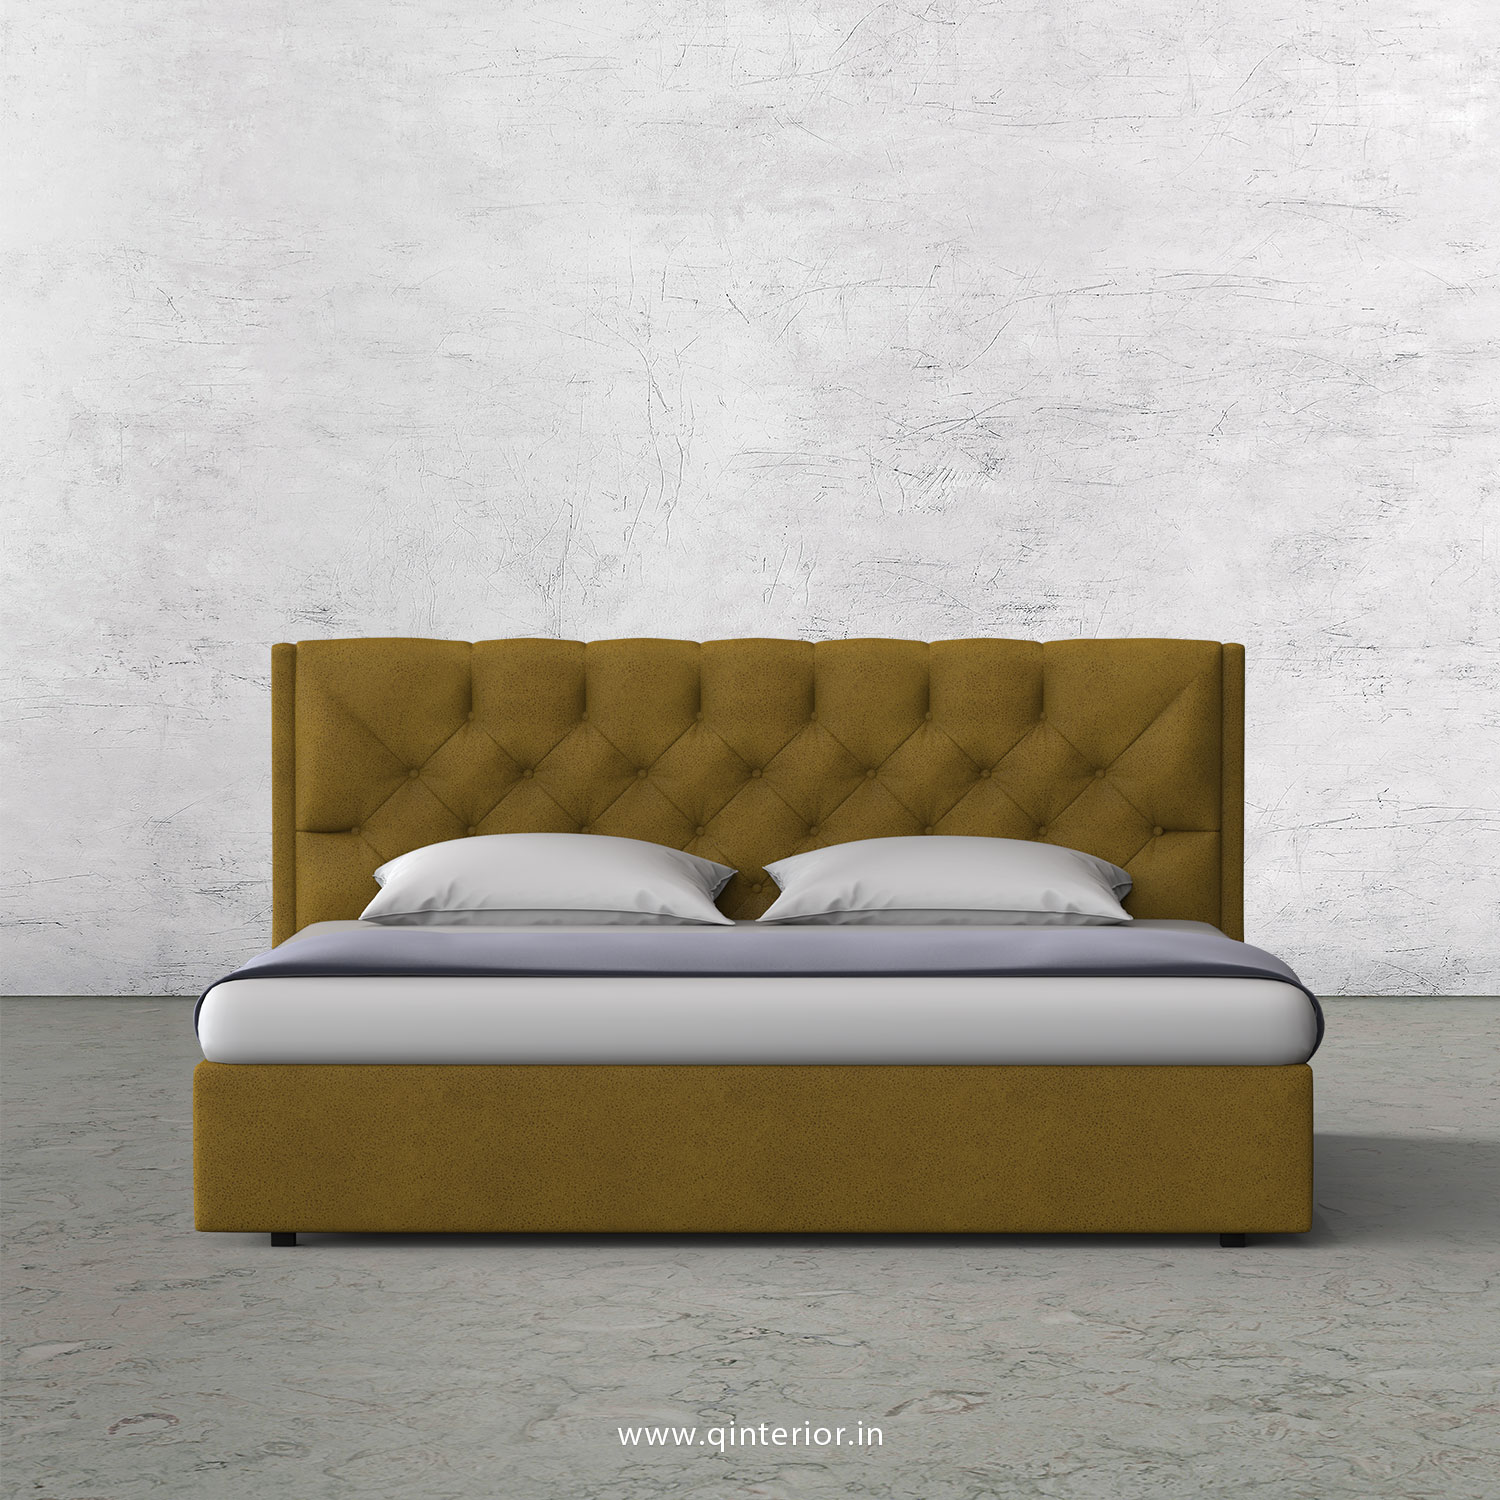 Scorpius Queen Bed in Fab Leather Fabric - QBD009 FL18